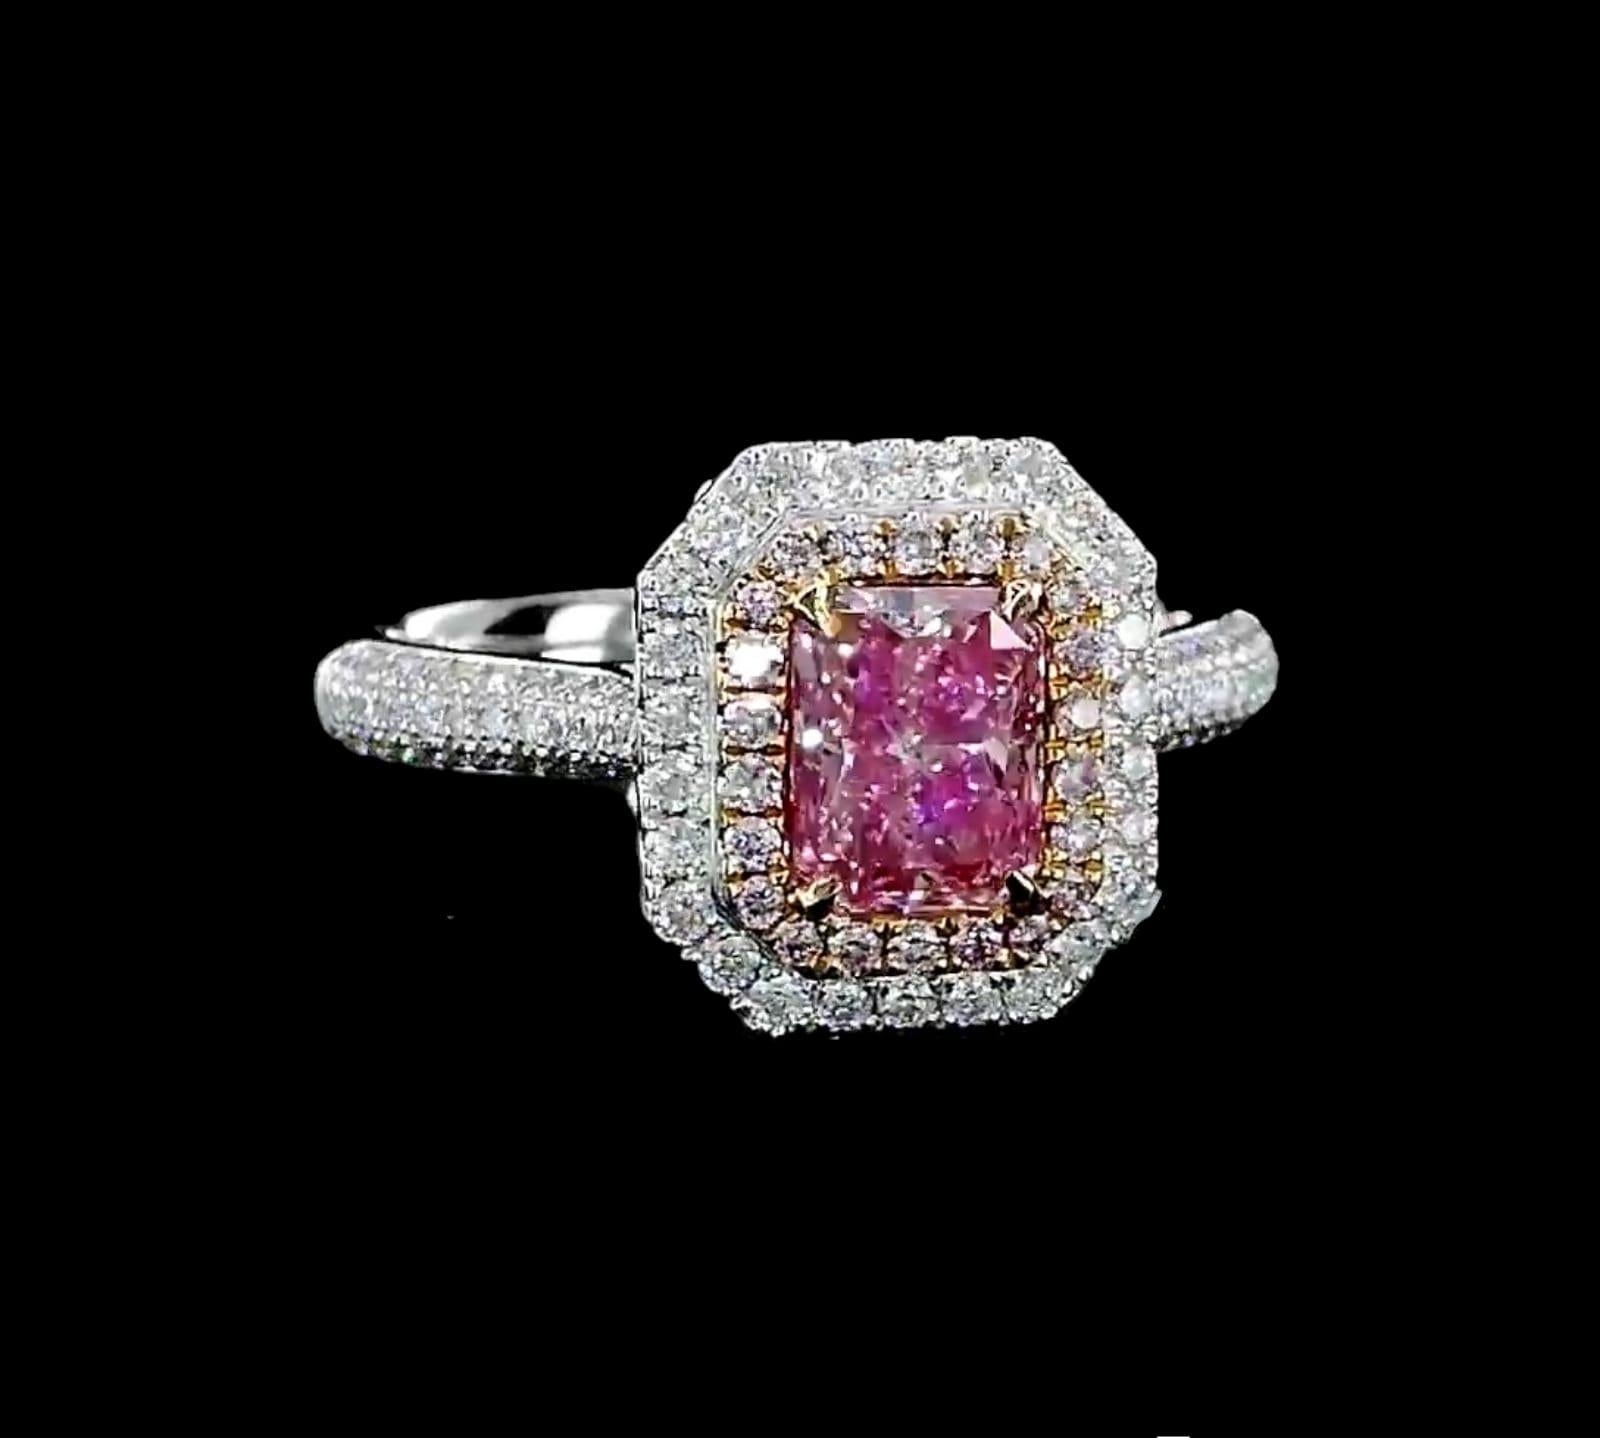 **100% NATURAL FANCY COLOUR DIAMOND JEWELRY**

✪ Jewelry Details ✪

♦ MAIN STONE DETAILS

➛ Stone Shape: Radiant
➛ Stone Color: Fancy Pink
➛ Stone Clarity: SI
➛ Stone Weight: 1.01 carats
➛ AGL certified

♦ SIDE STONE DETAILS

➛ Side white diamonds -